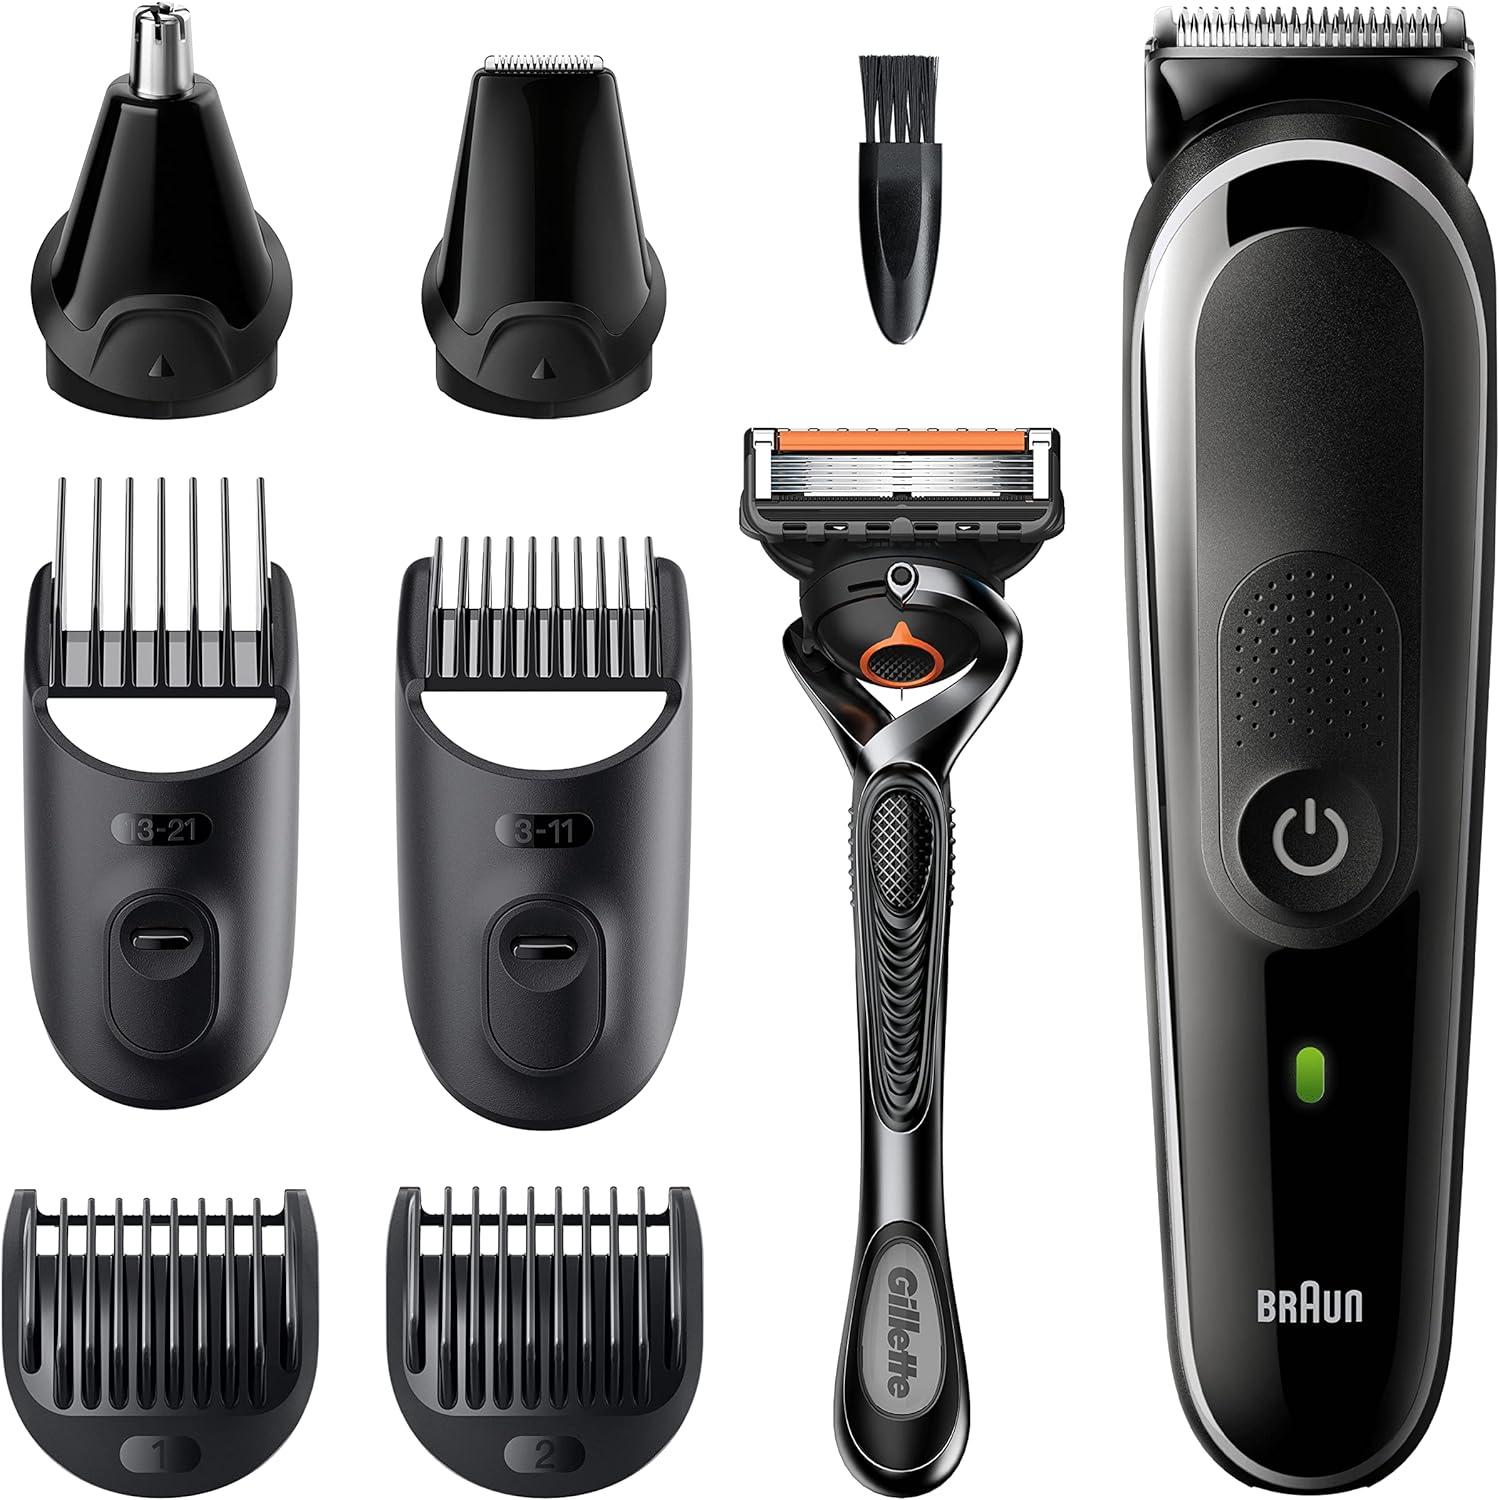 Kit 5 Men 8-In-1 Trimmer Pin Plug & With UK Series Braun For Beard Male Clippers Ear 2 Razor All-In-One Nose Hair Attachments Trimmer & Gillette Black/Grey Gifts 6 MGK5260 Grooming